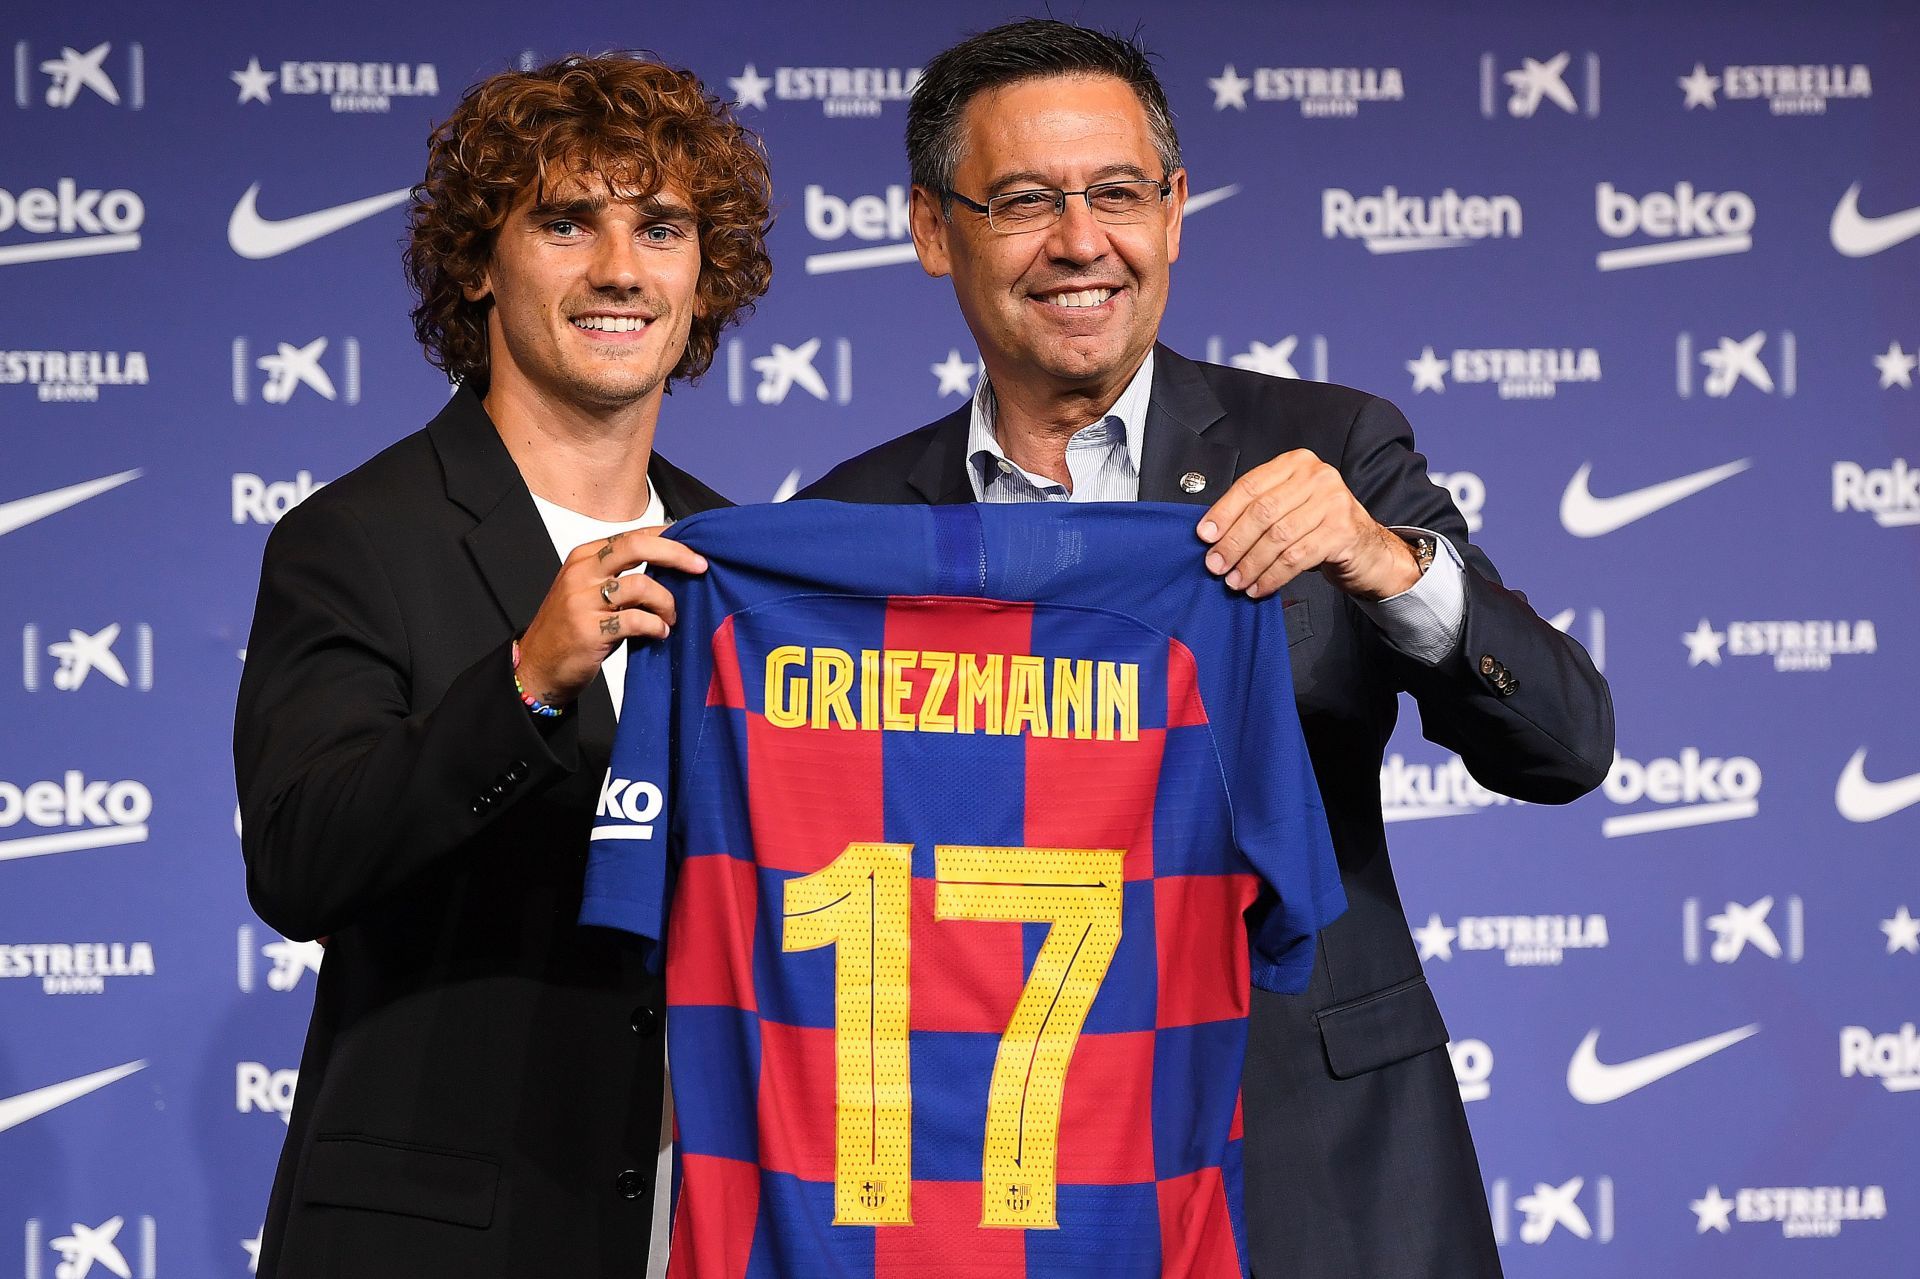 Griezmann has now returned to Atletico Madrid